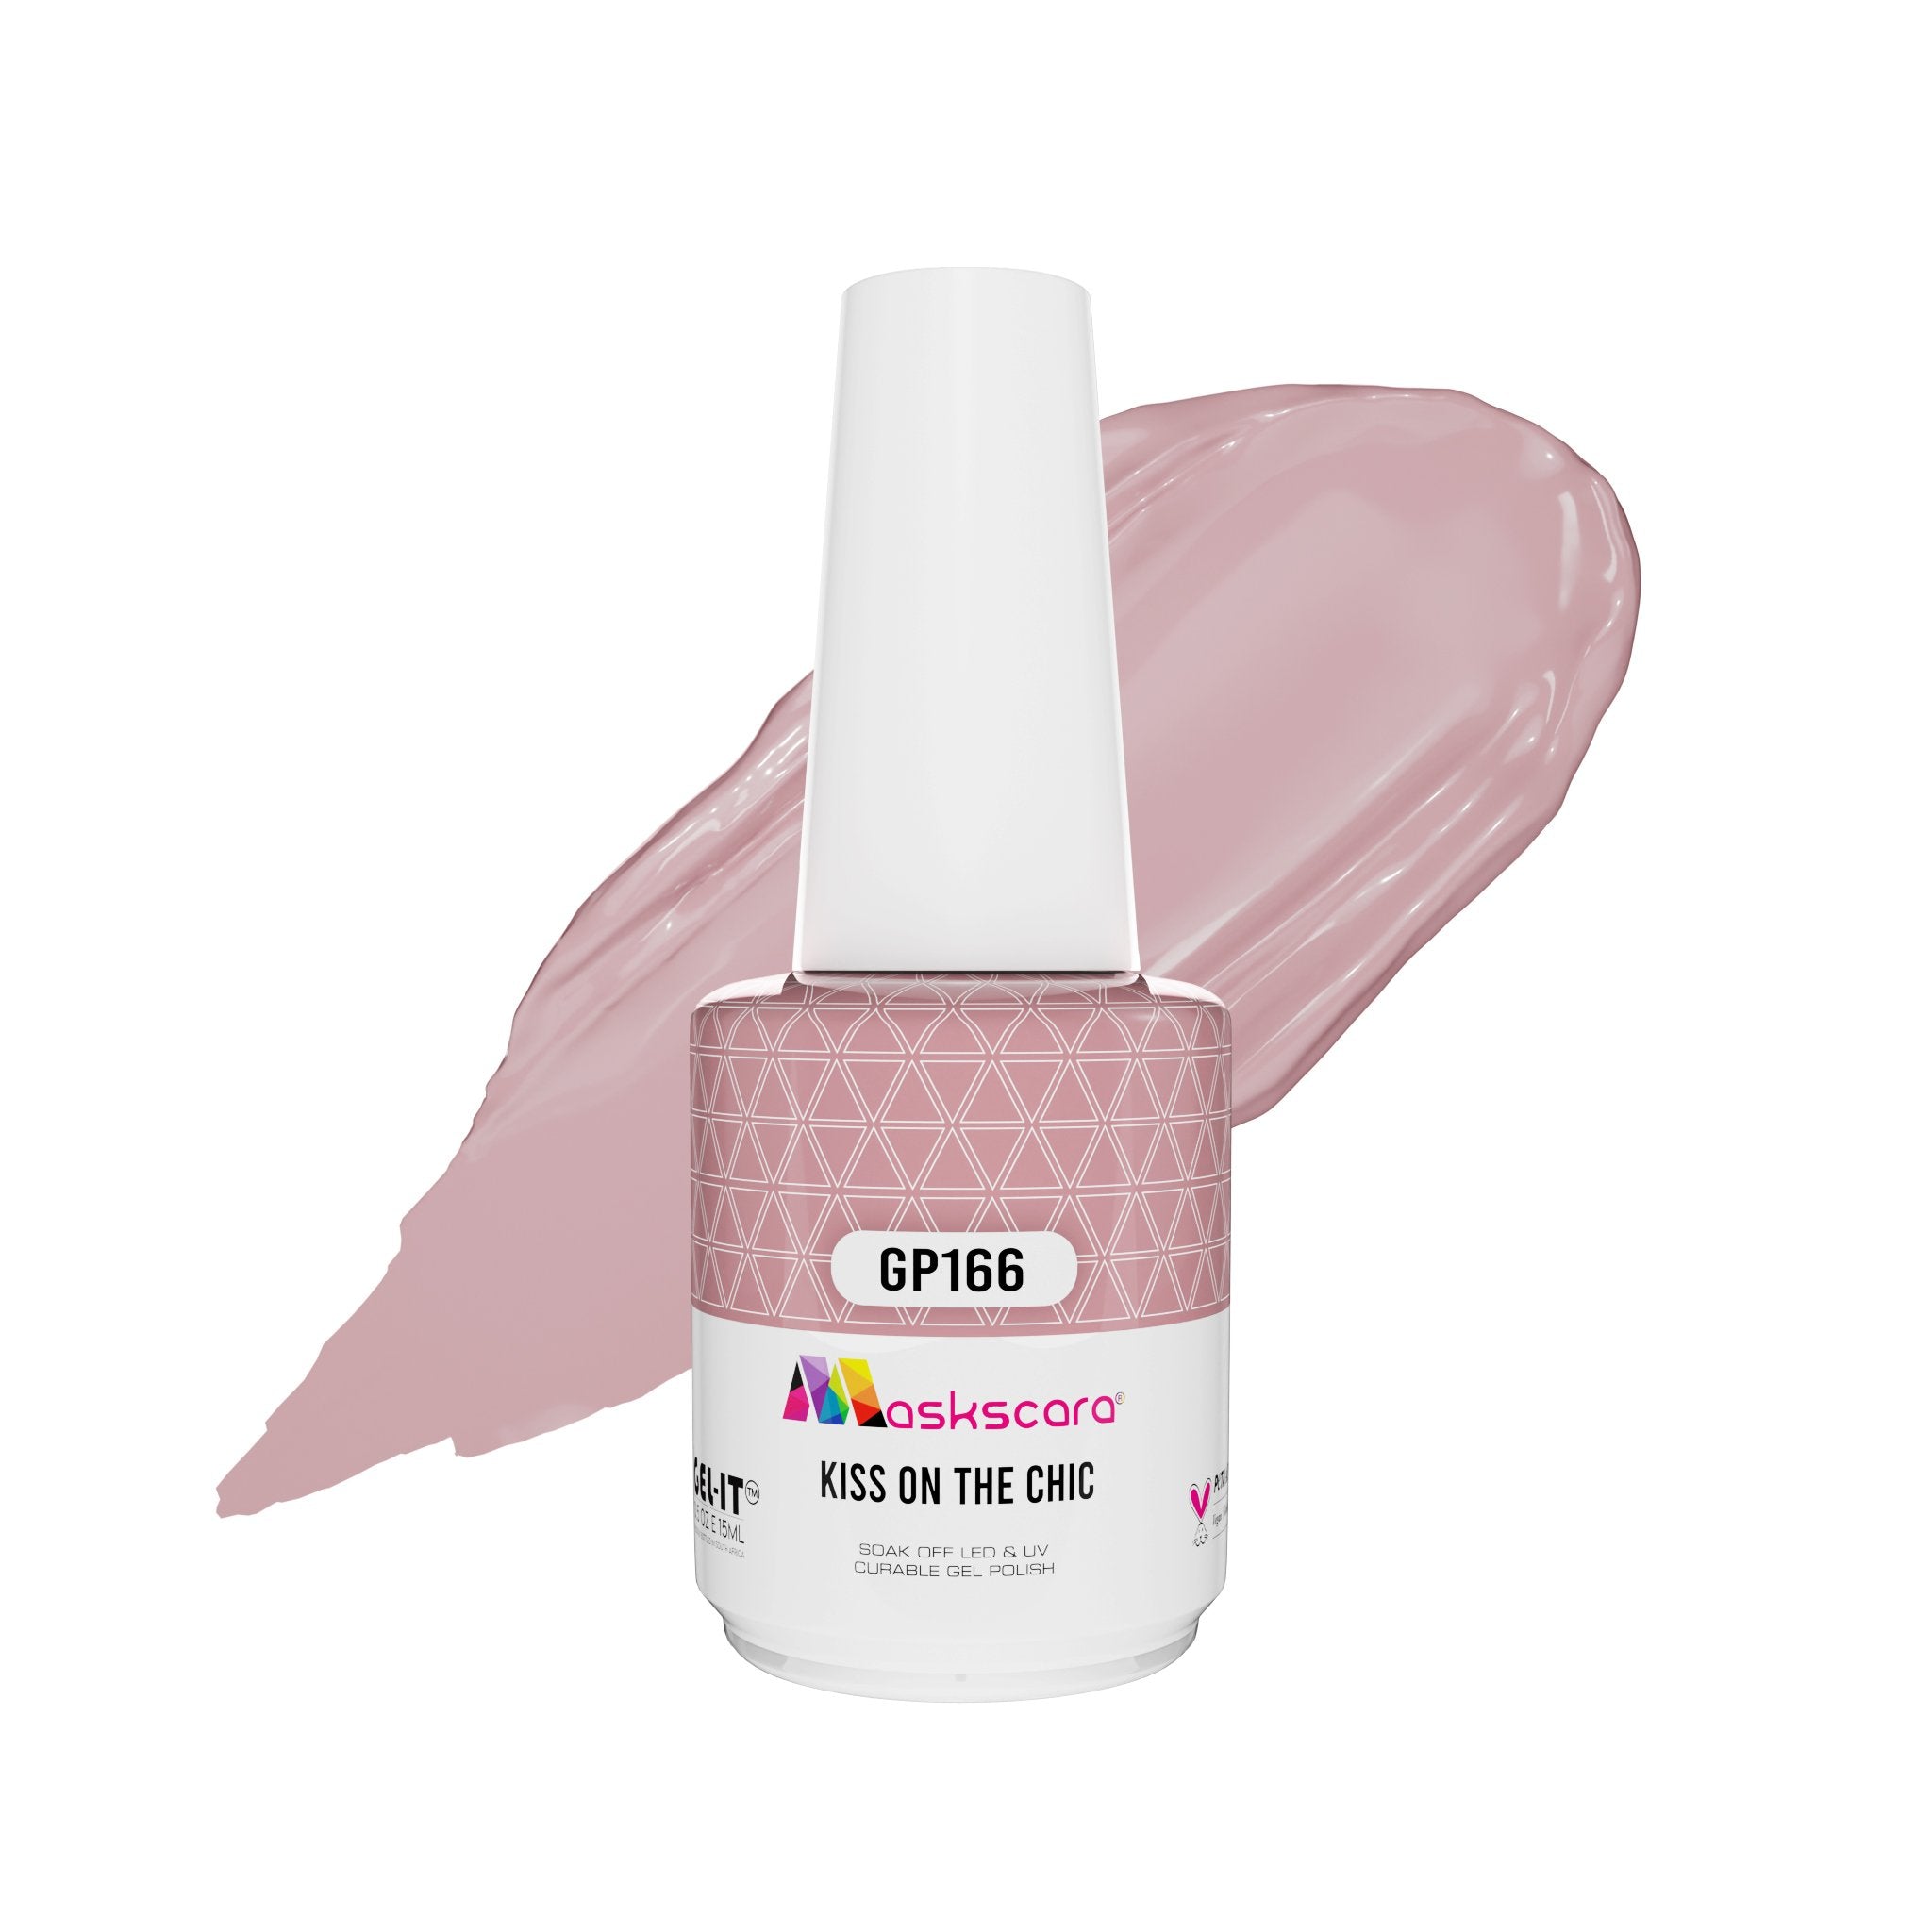 <img scr = “ GP166 Kiss On The Chic.jpeg” alt = “Putty Pink gel polish colour by the brand Maskscara”>